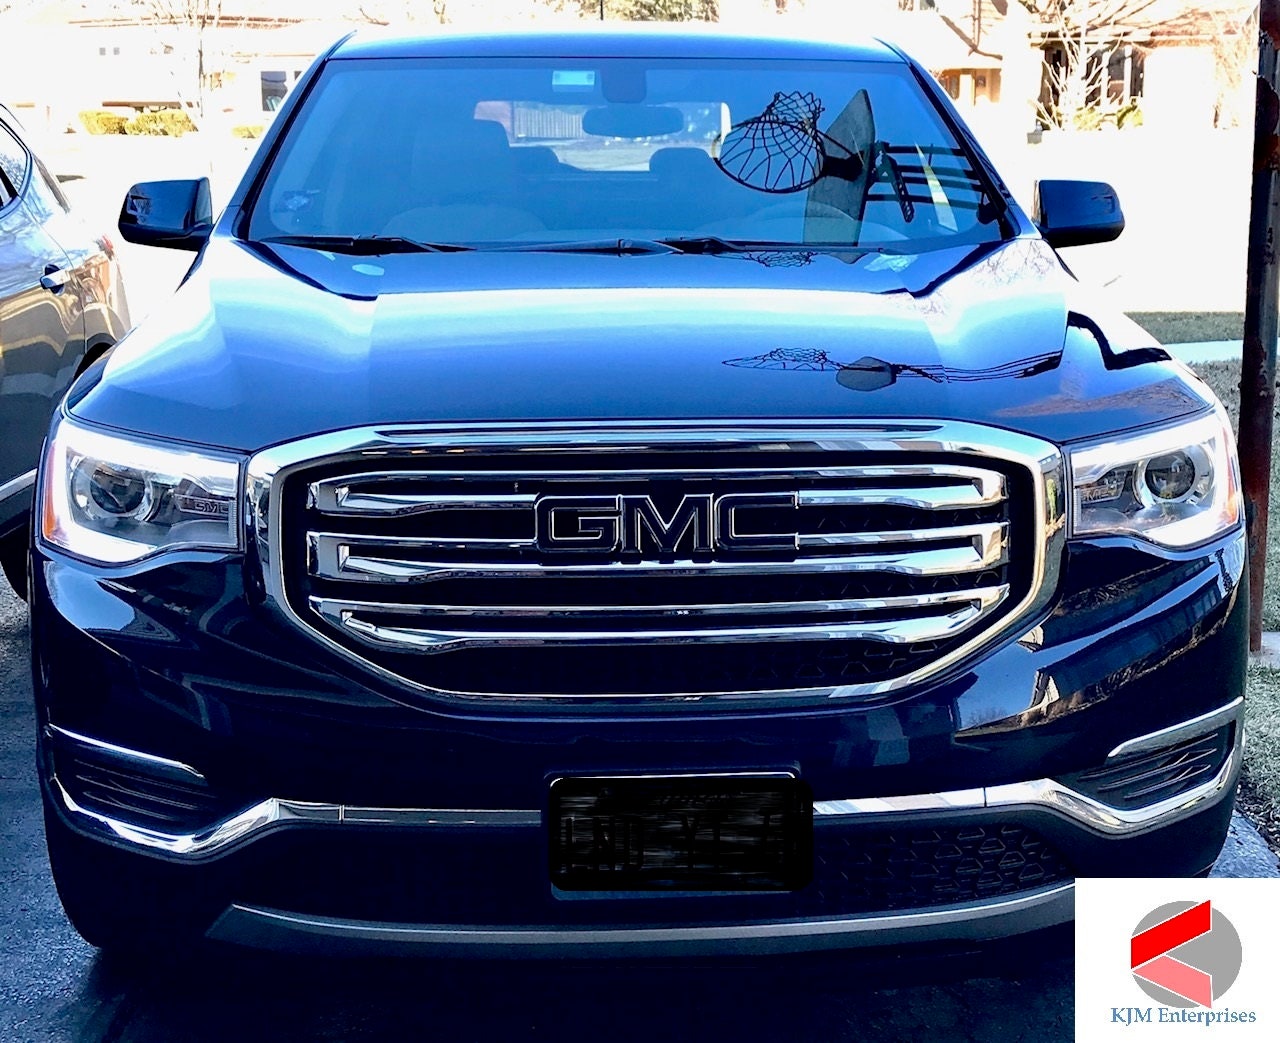 2011-2016 ACADIA Precut Emblem Overlay DECALS Compatible With GMC | Front & Rear Set